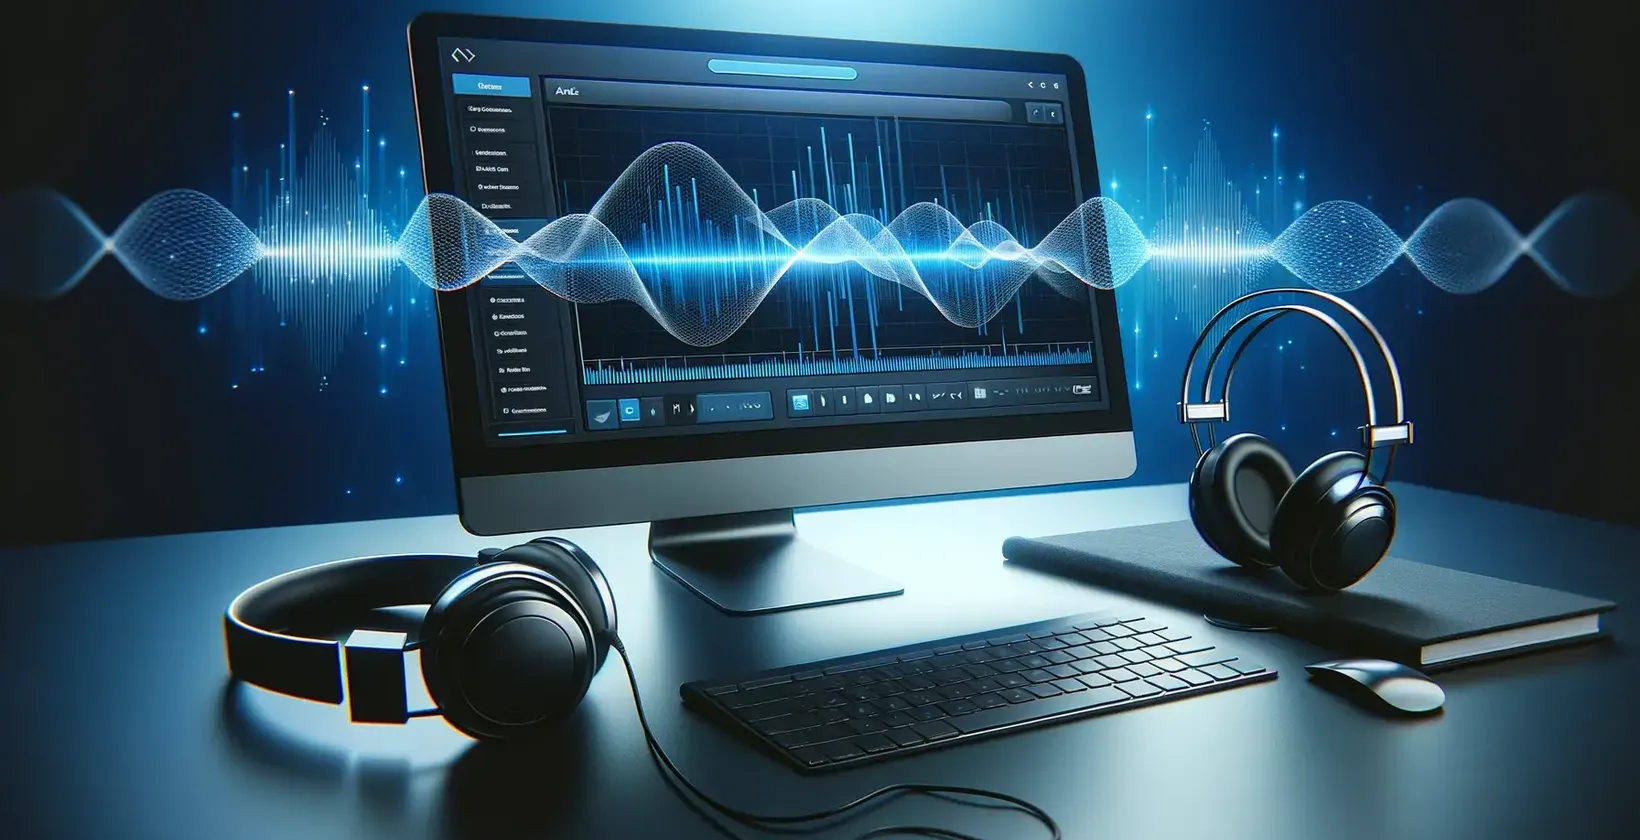 FLAC to text emphasized by an audio workstation with a pulsating waveform visual on the screen and a set of headphones.